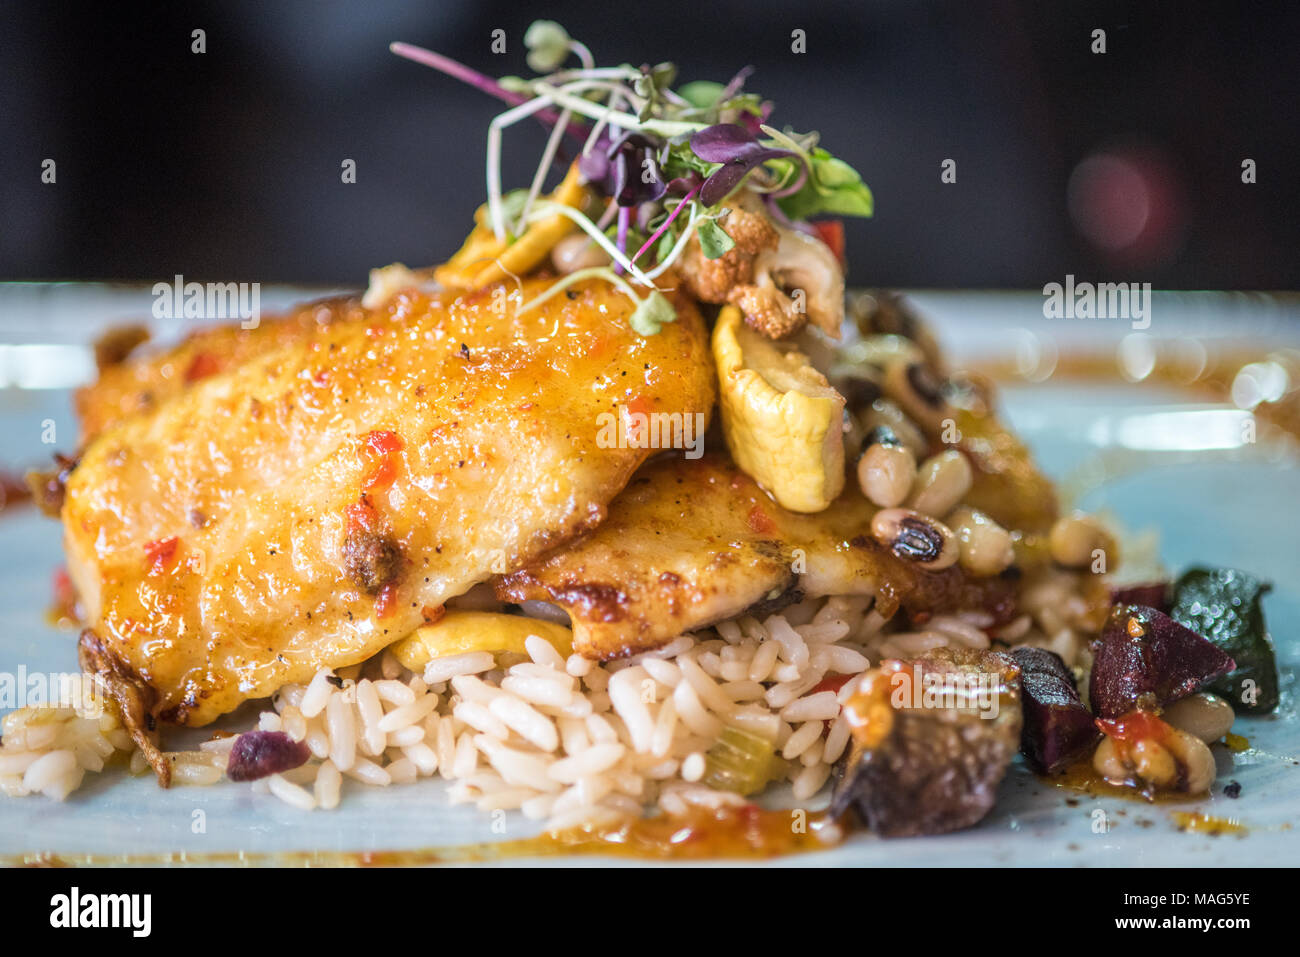 Gourmet plated dish featuring local and sustainably-sourced blue catfish, pan-seared and glazed with a sweet curry sauce. Served with HoppinÕ John and Stock Photo